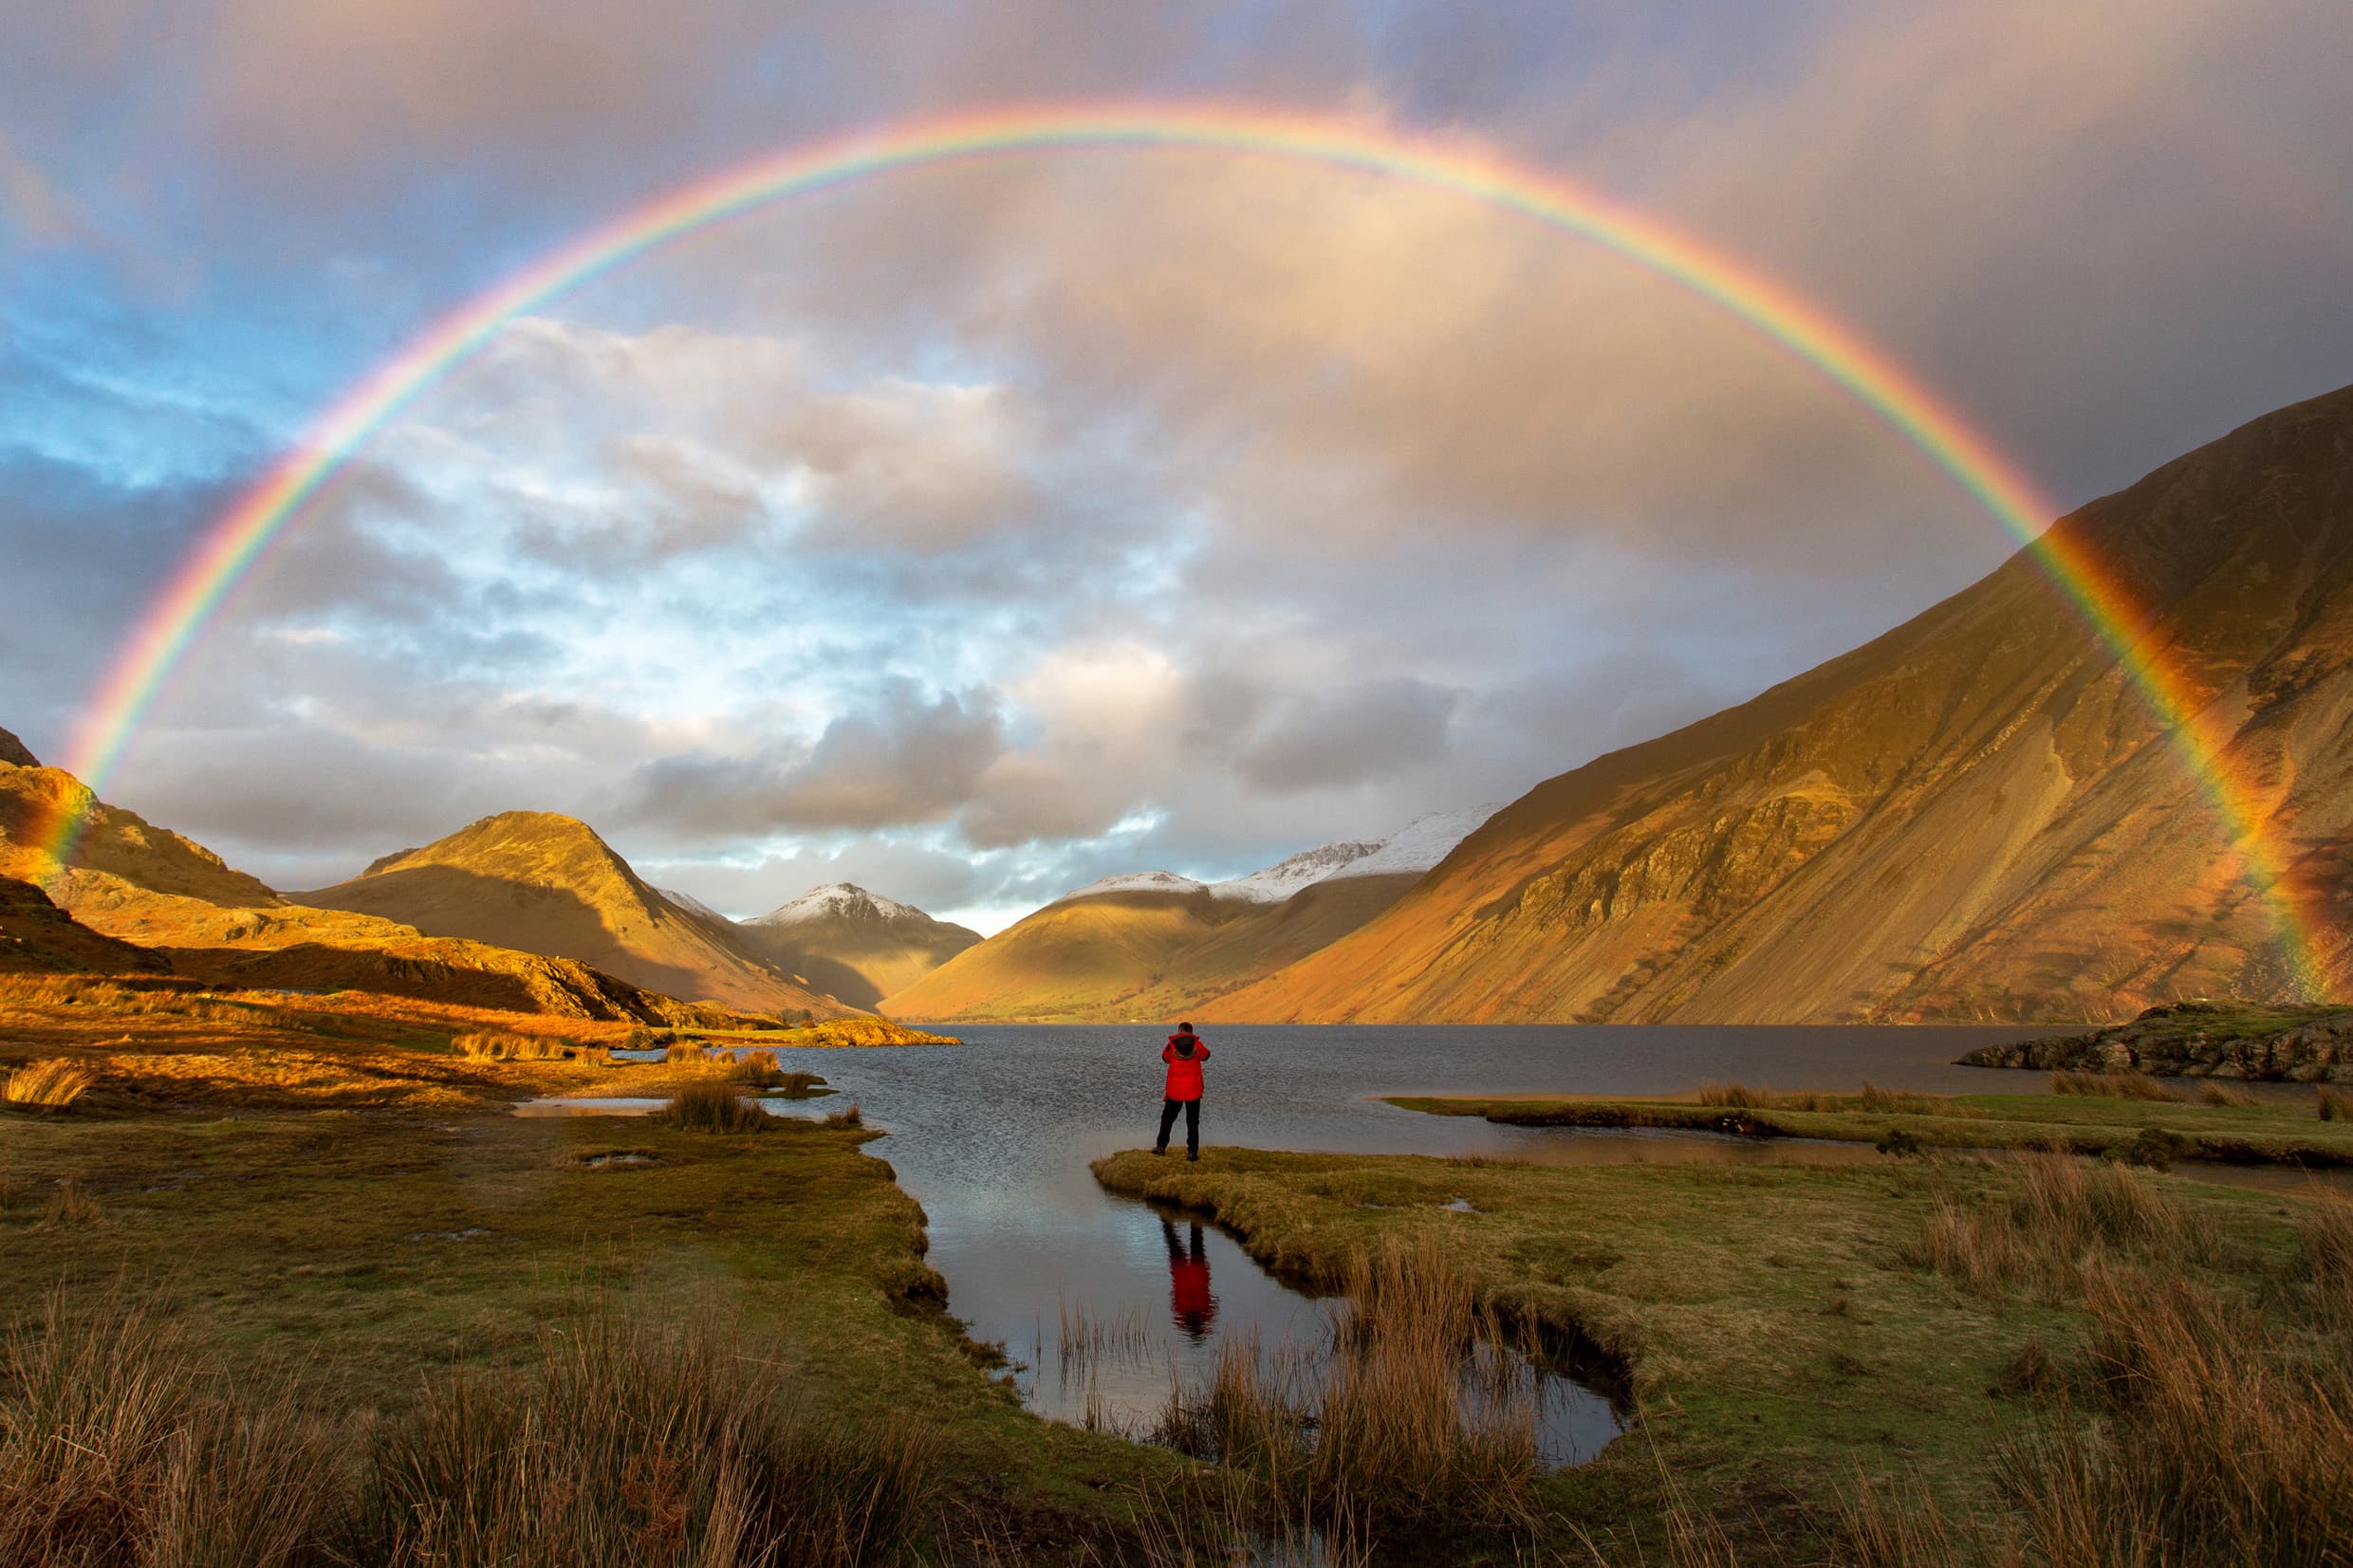 Finding Gold, Wast Water, Cumbria, England. Winner of the OMGB Amazing Moments special award. Image by Mark Gilligan